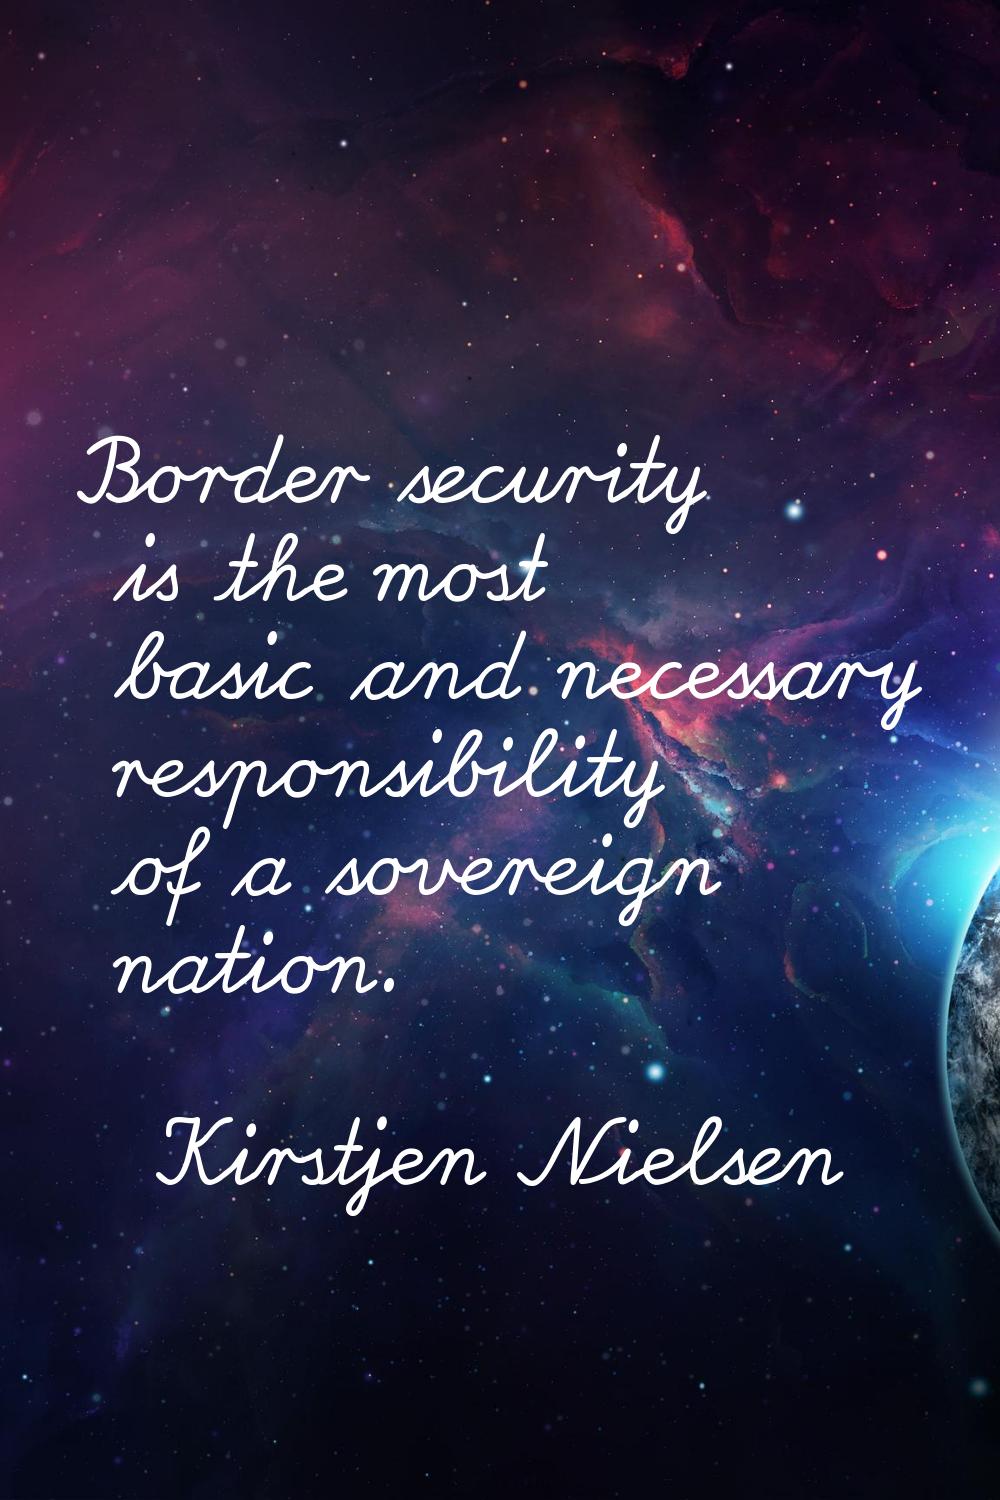 Border security is the most basic and necessary responsibility of a sovereign nation.